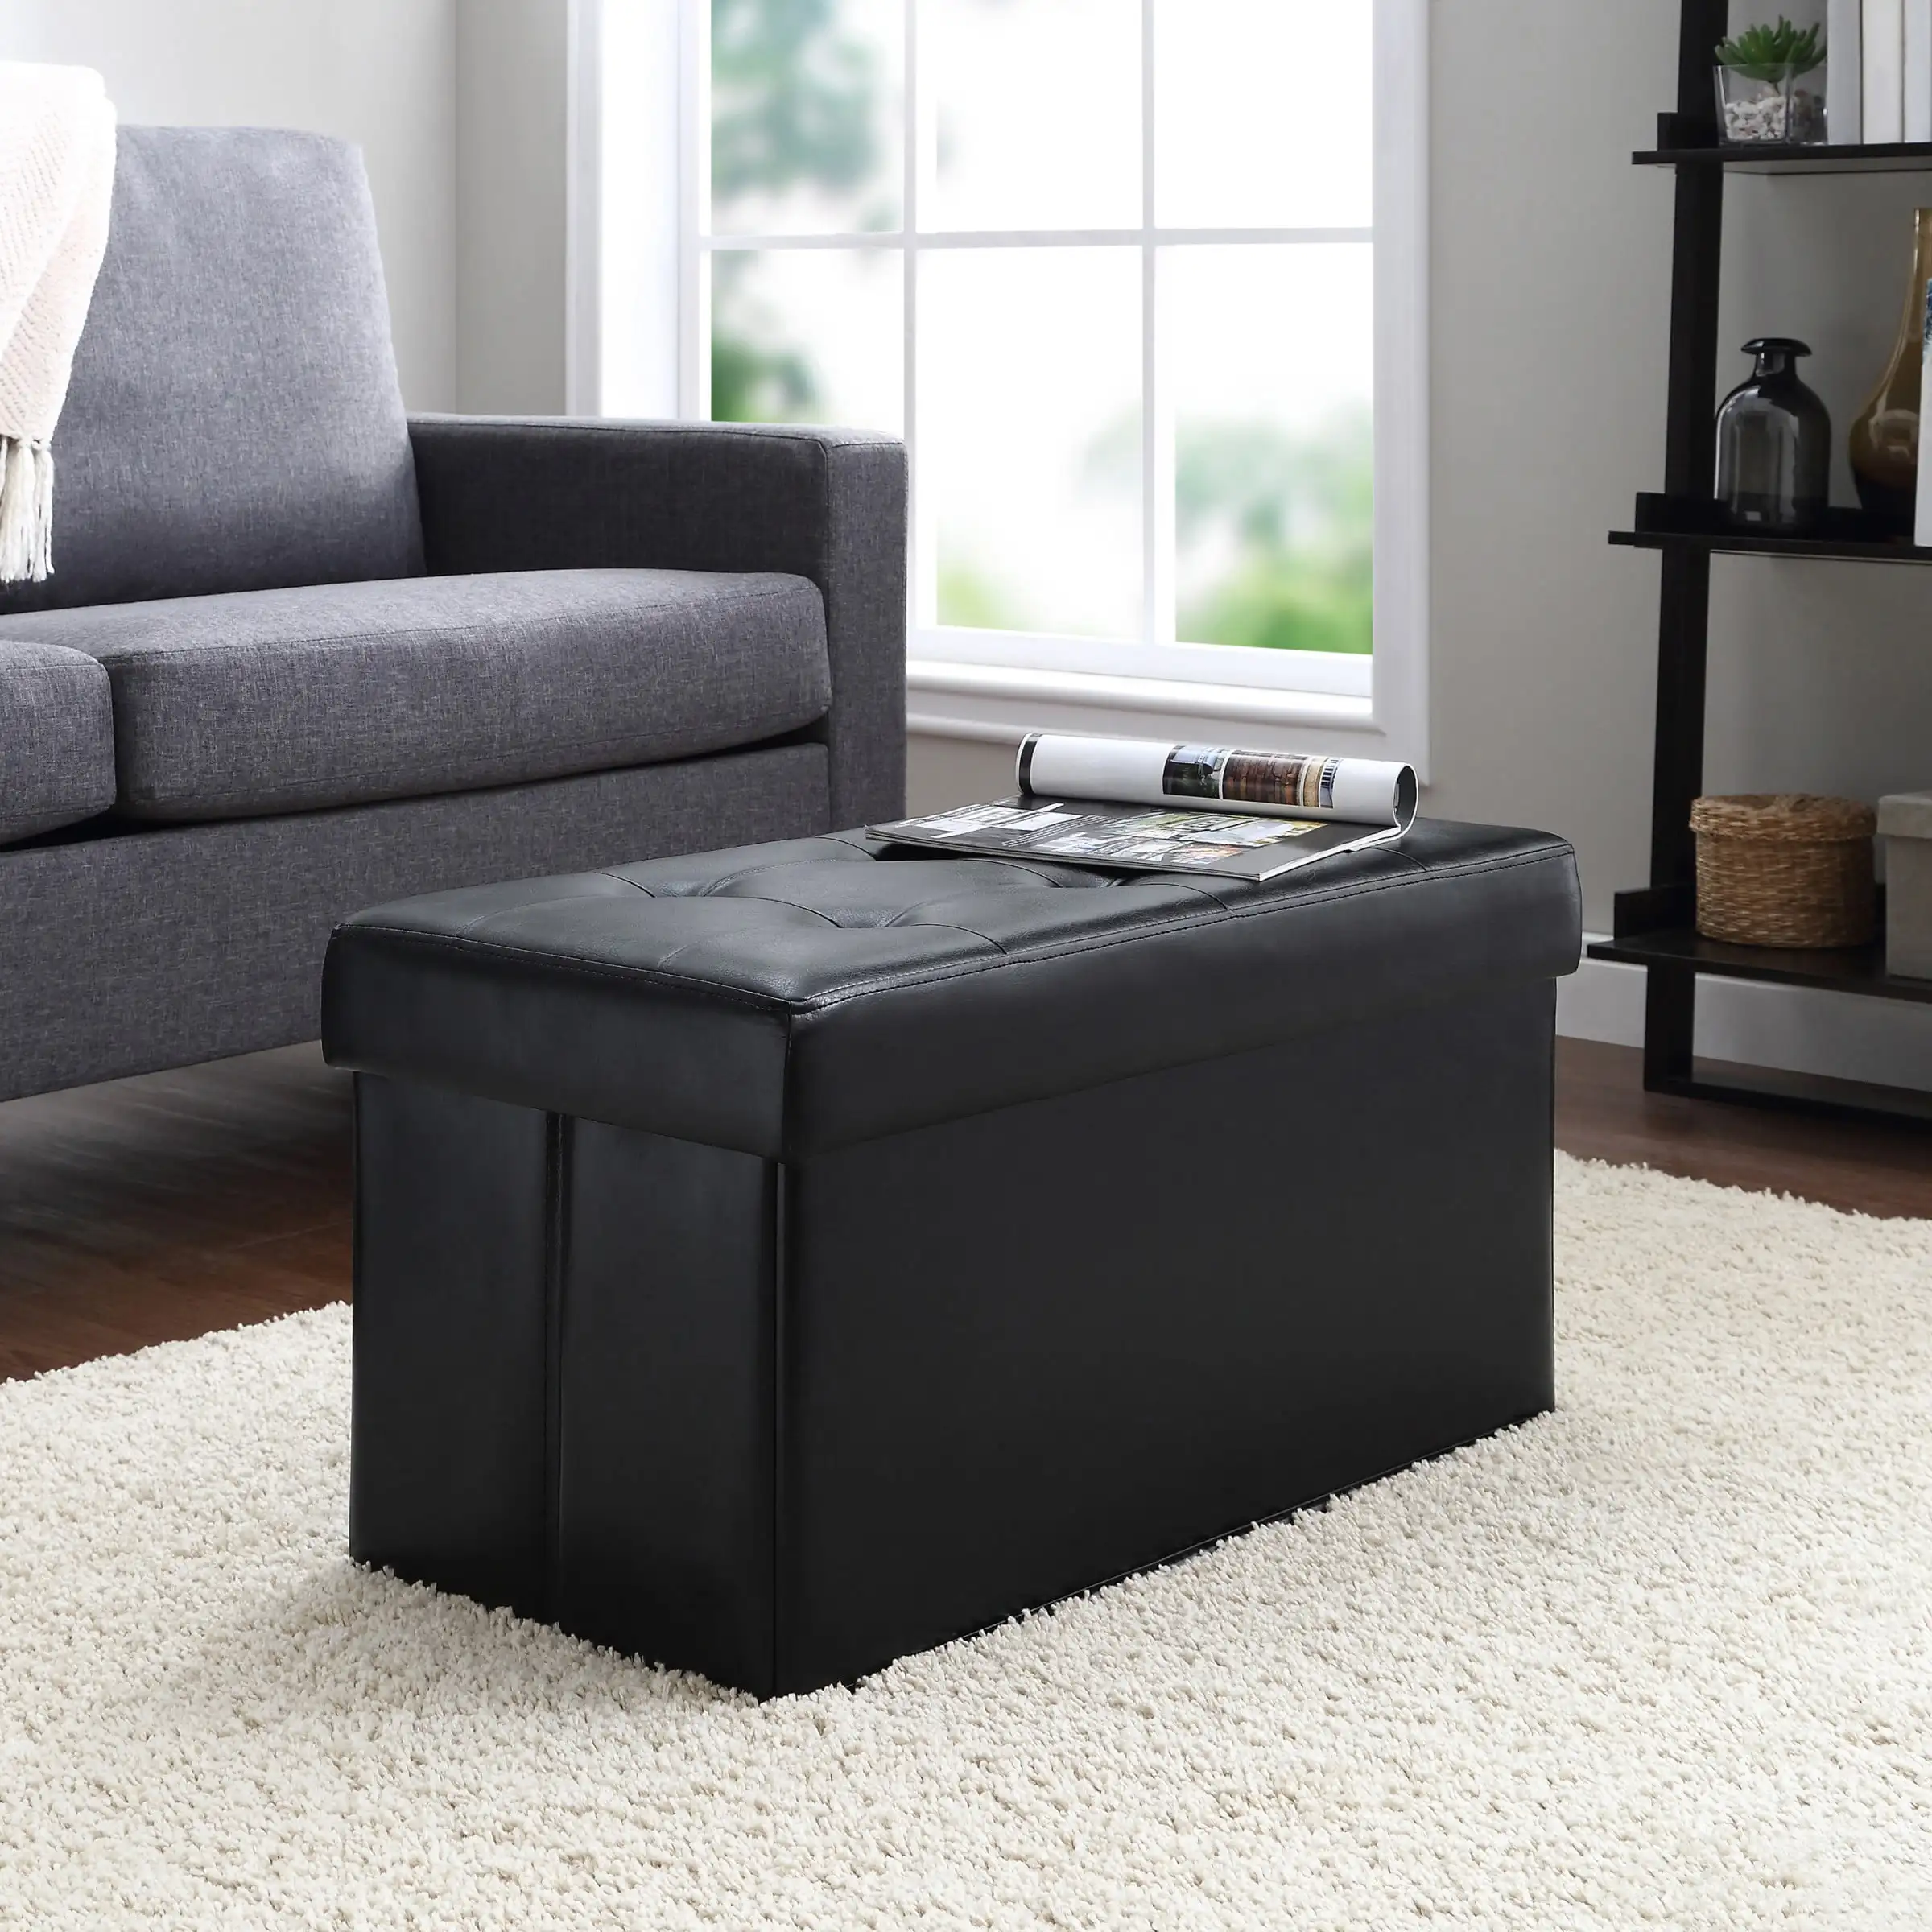 

Mainstays 30-inch Collapsible Storage Ottoman, Quilted Black Faux Leather